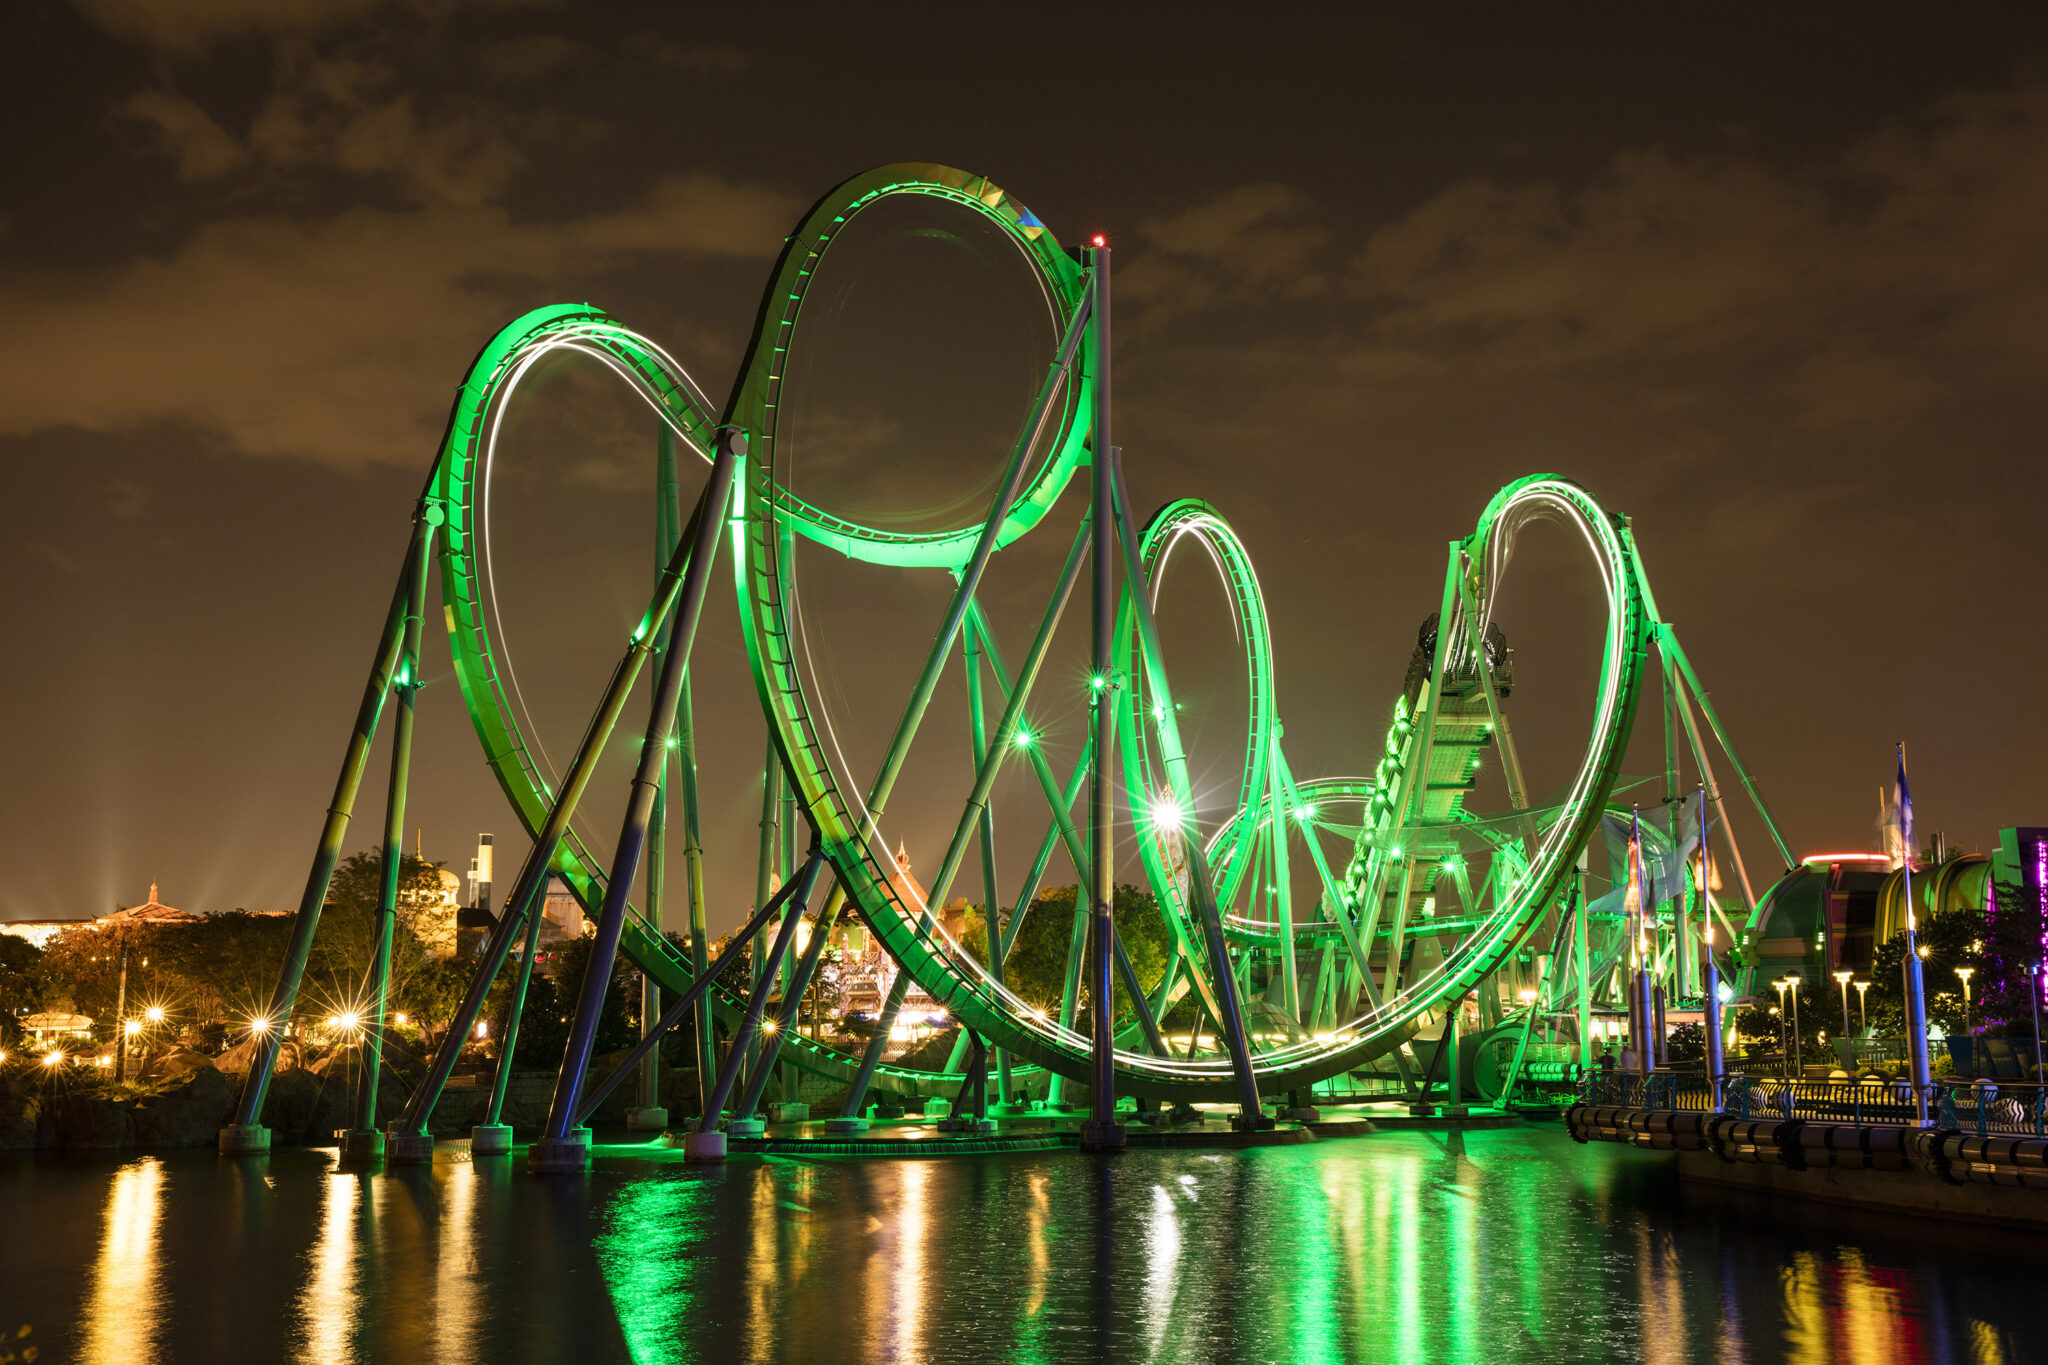 What’s the best-rated theme park in the United States?